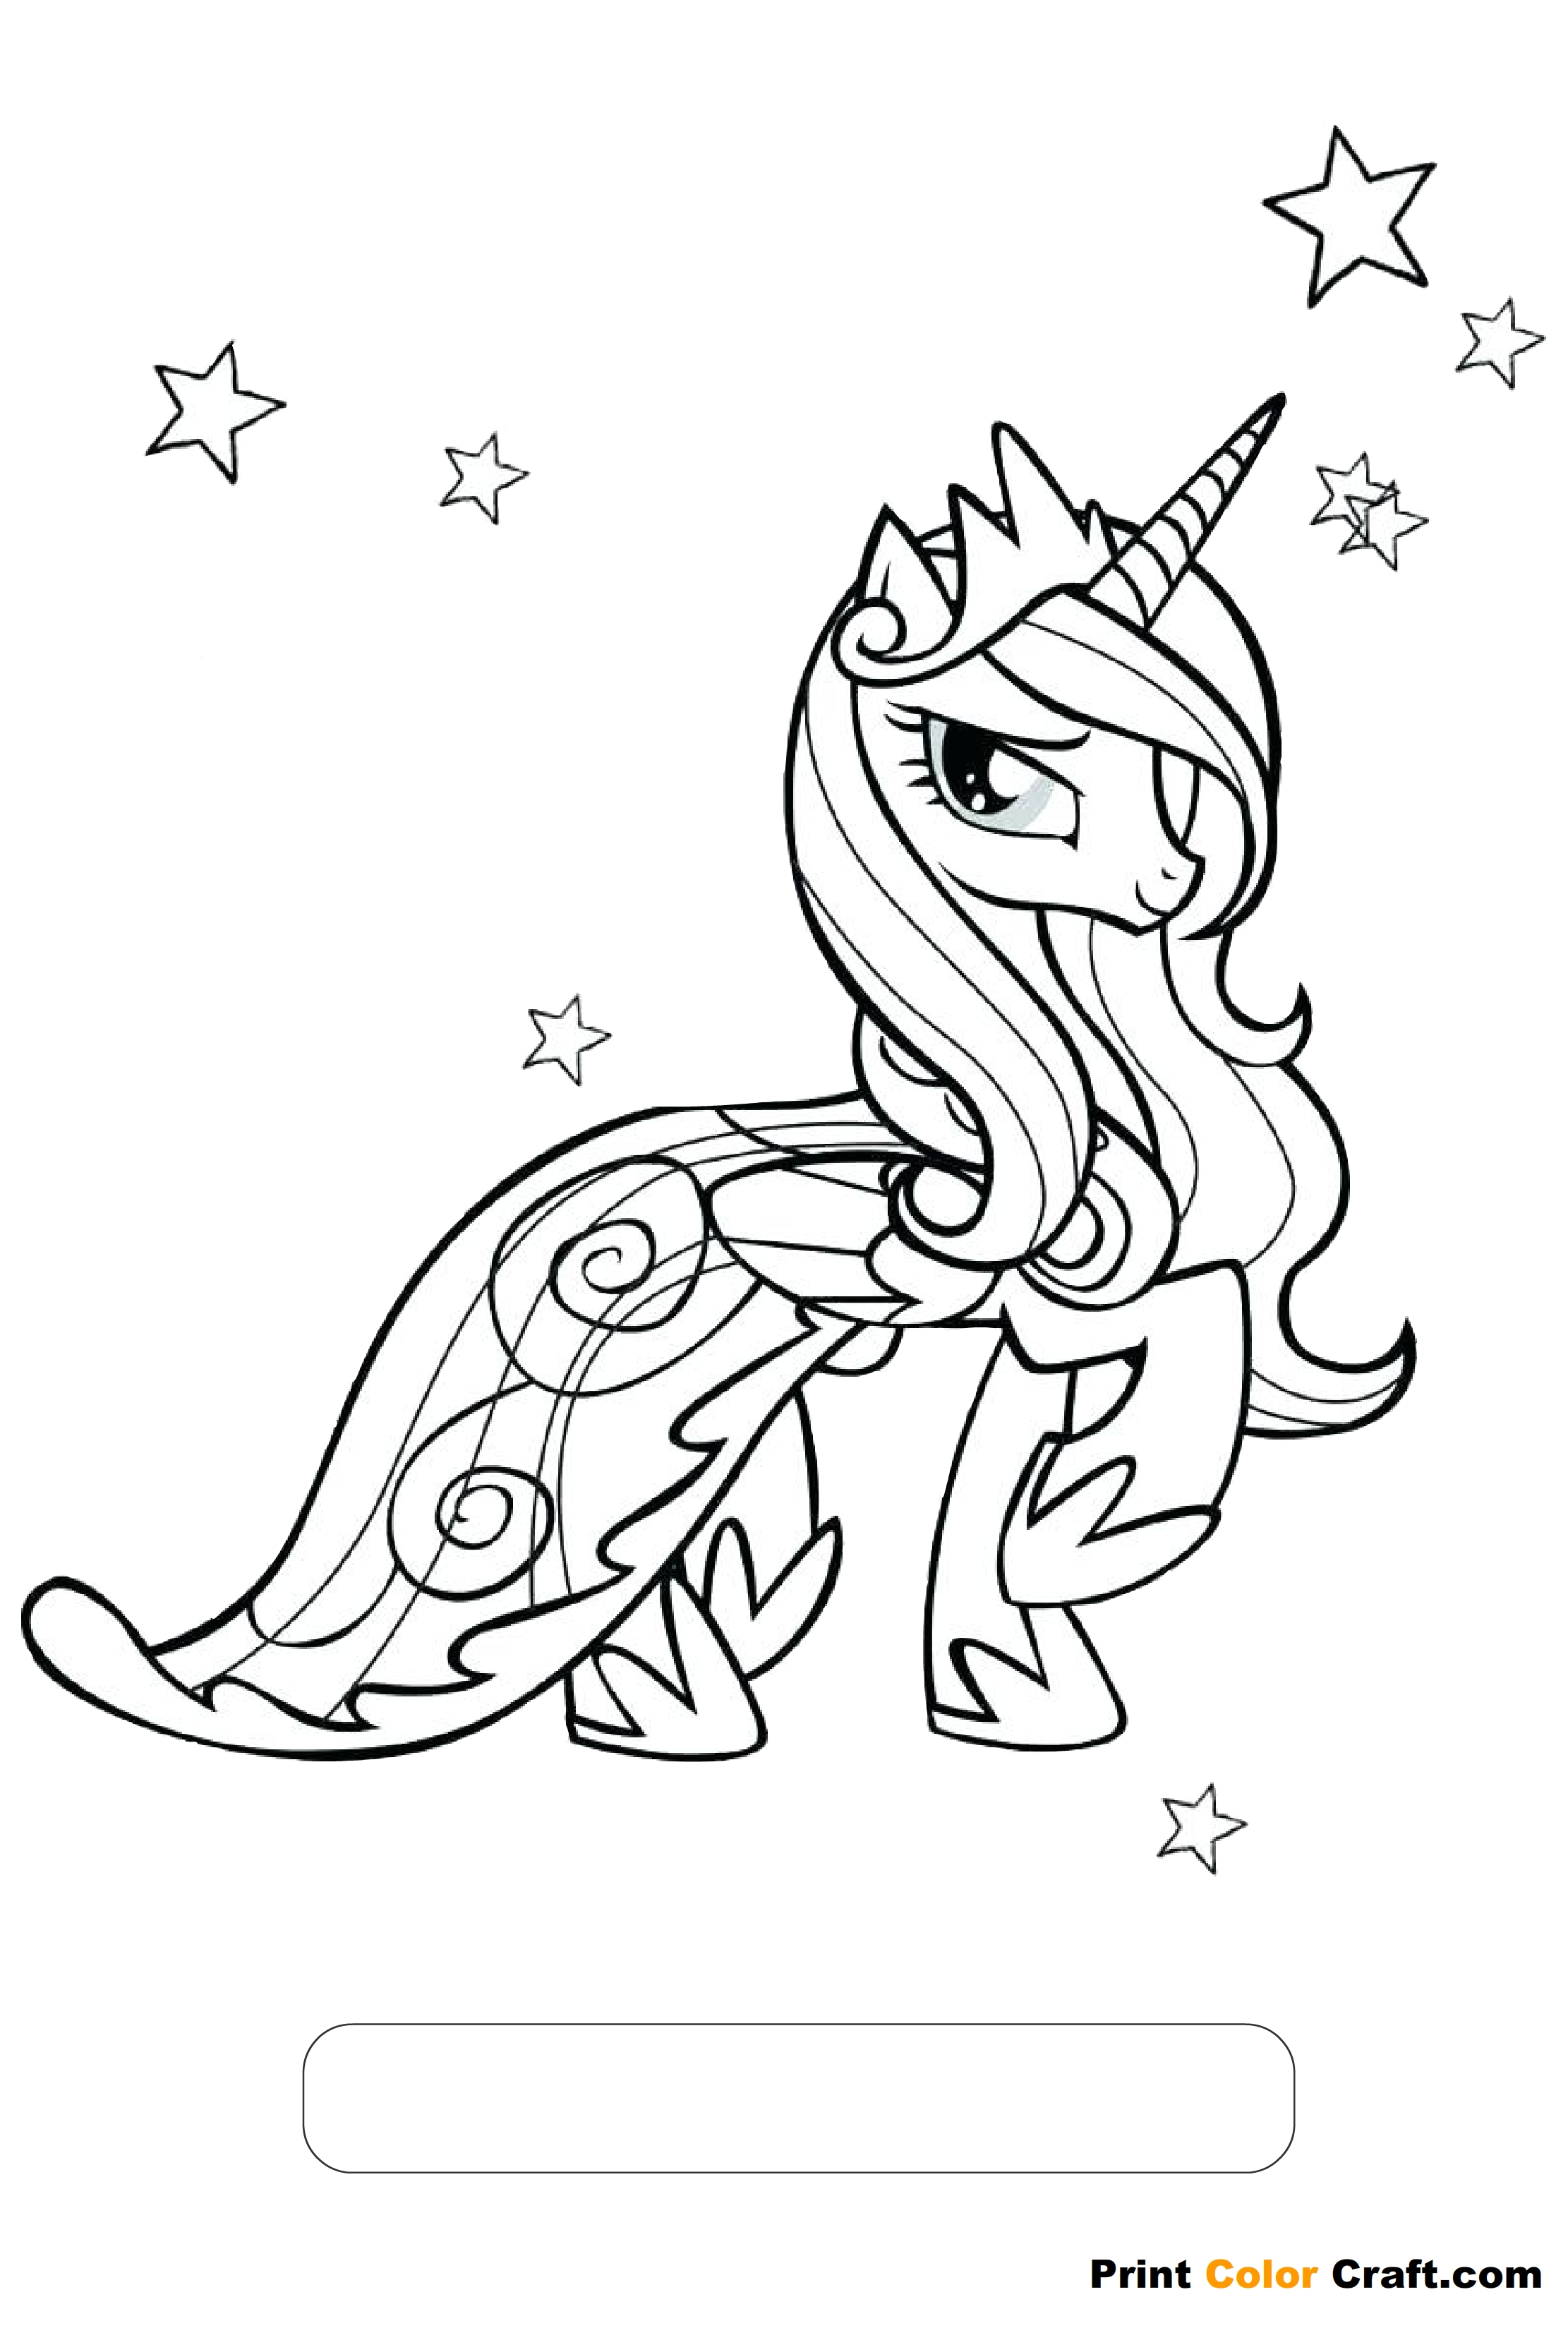 adorable unicorn coloring pages for girls and adults updated printcolor